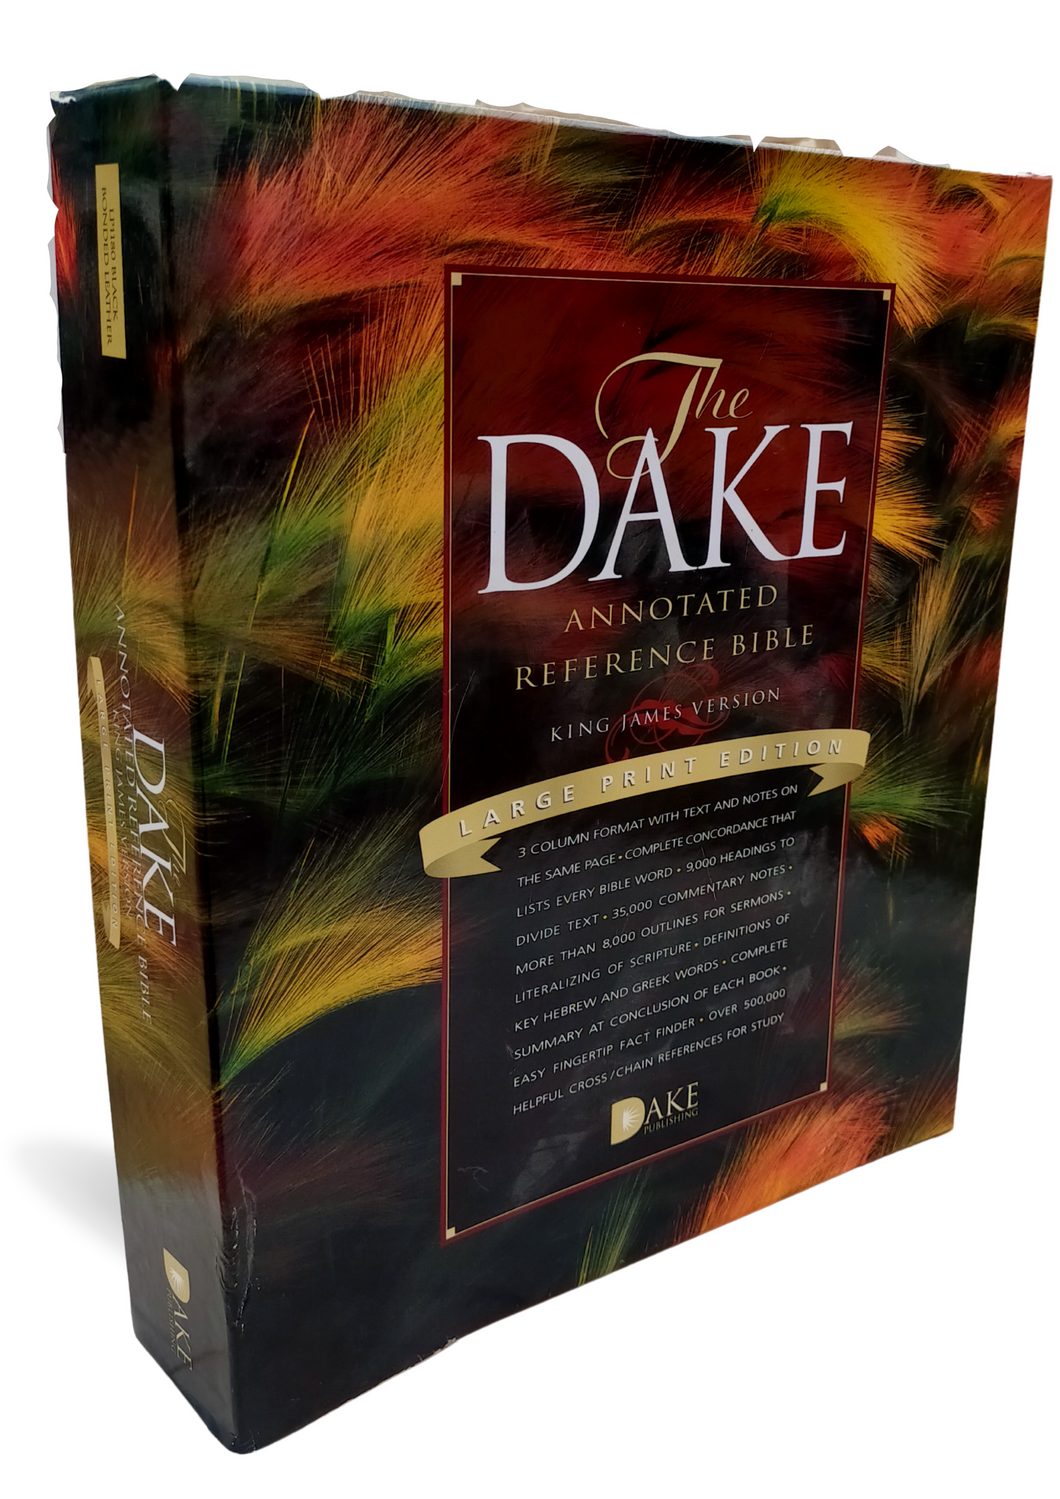 Dake Annotated Reference Bible KJV Leather Soft Black Large Print edition